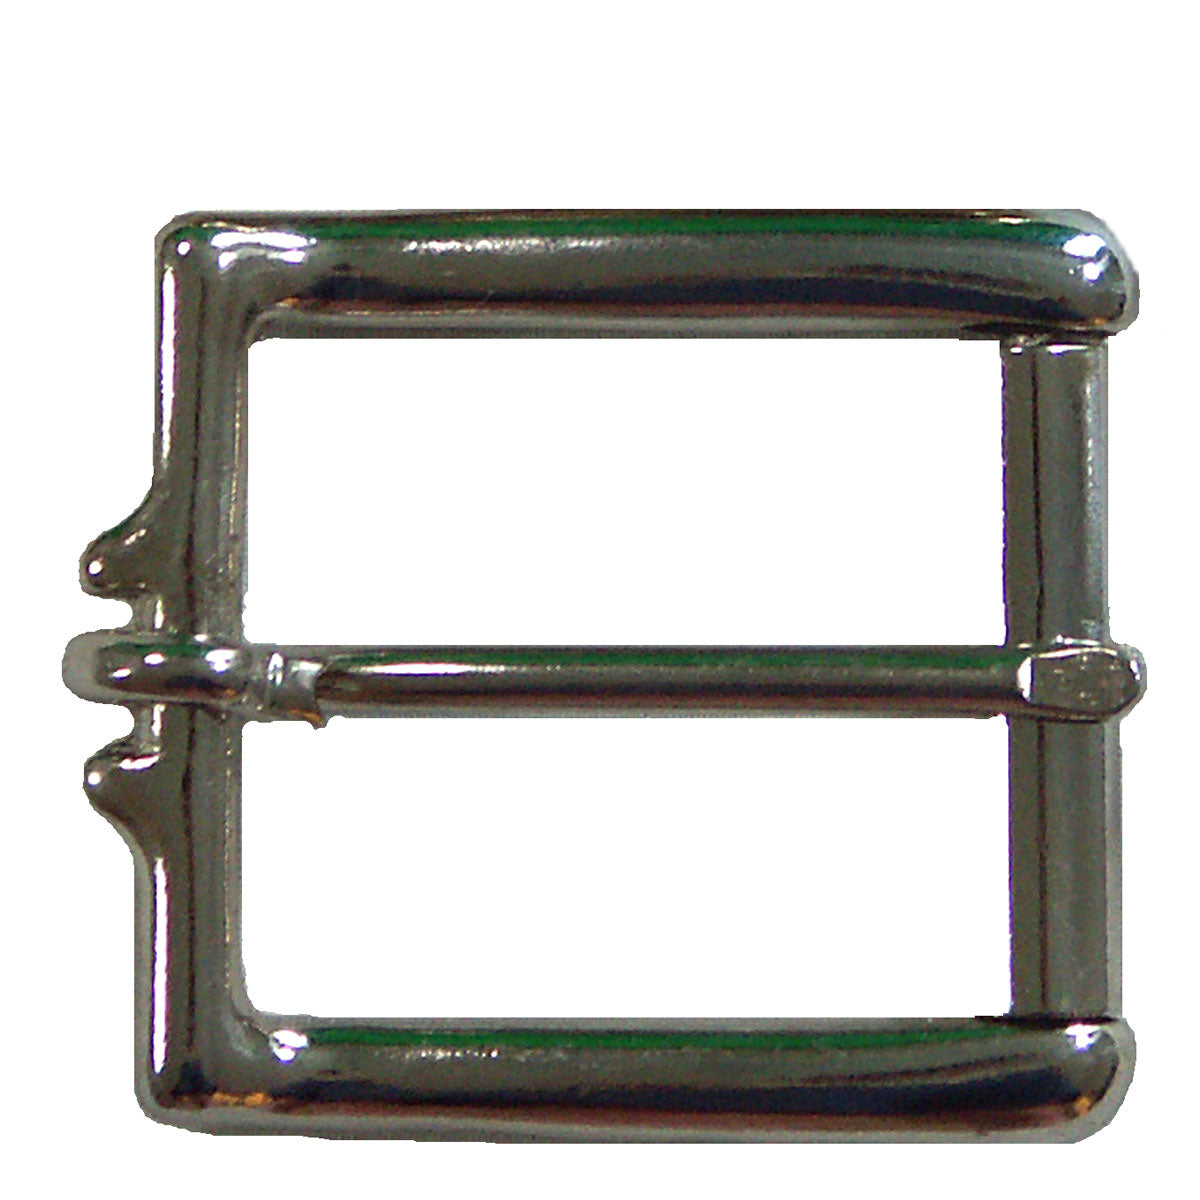 #49 Stainless Steel Buckle 1"